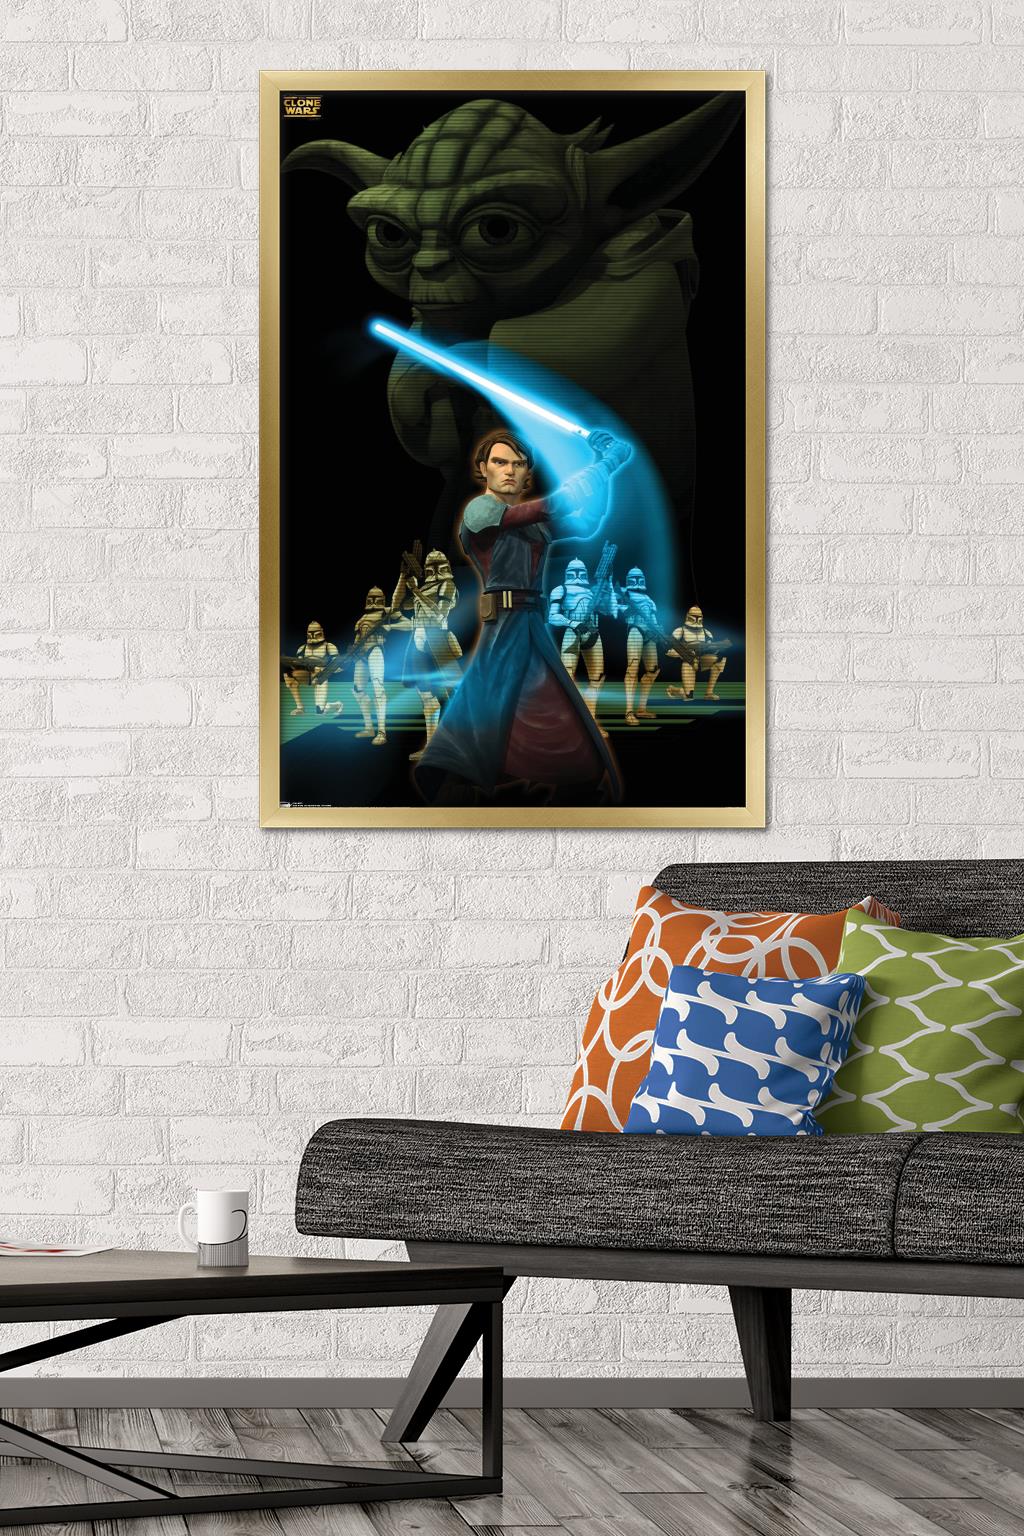 Star Wars: The Clone Wars - The Force Wall Poster, 22.375" x 34", Framed - image 2 of 5